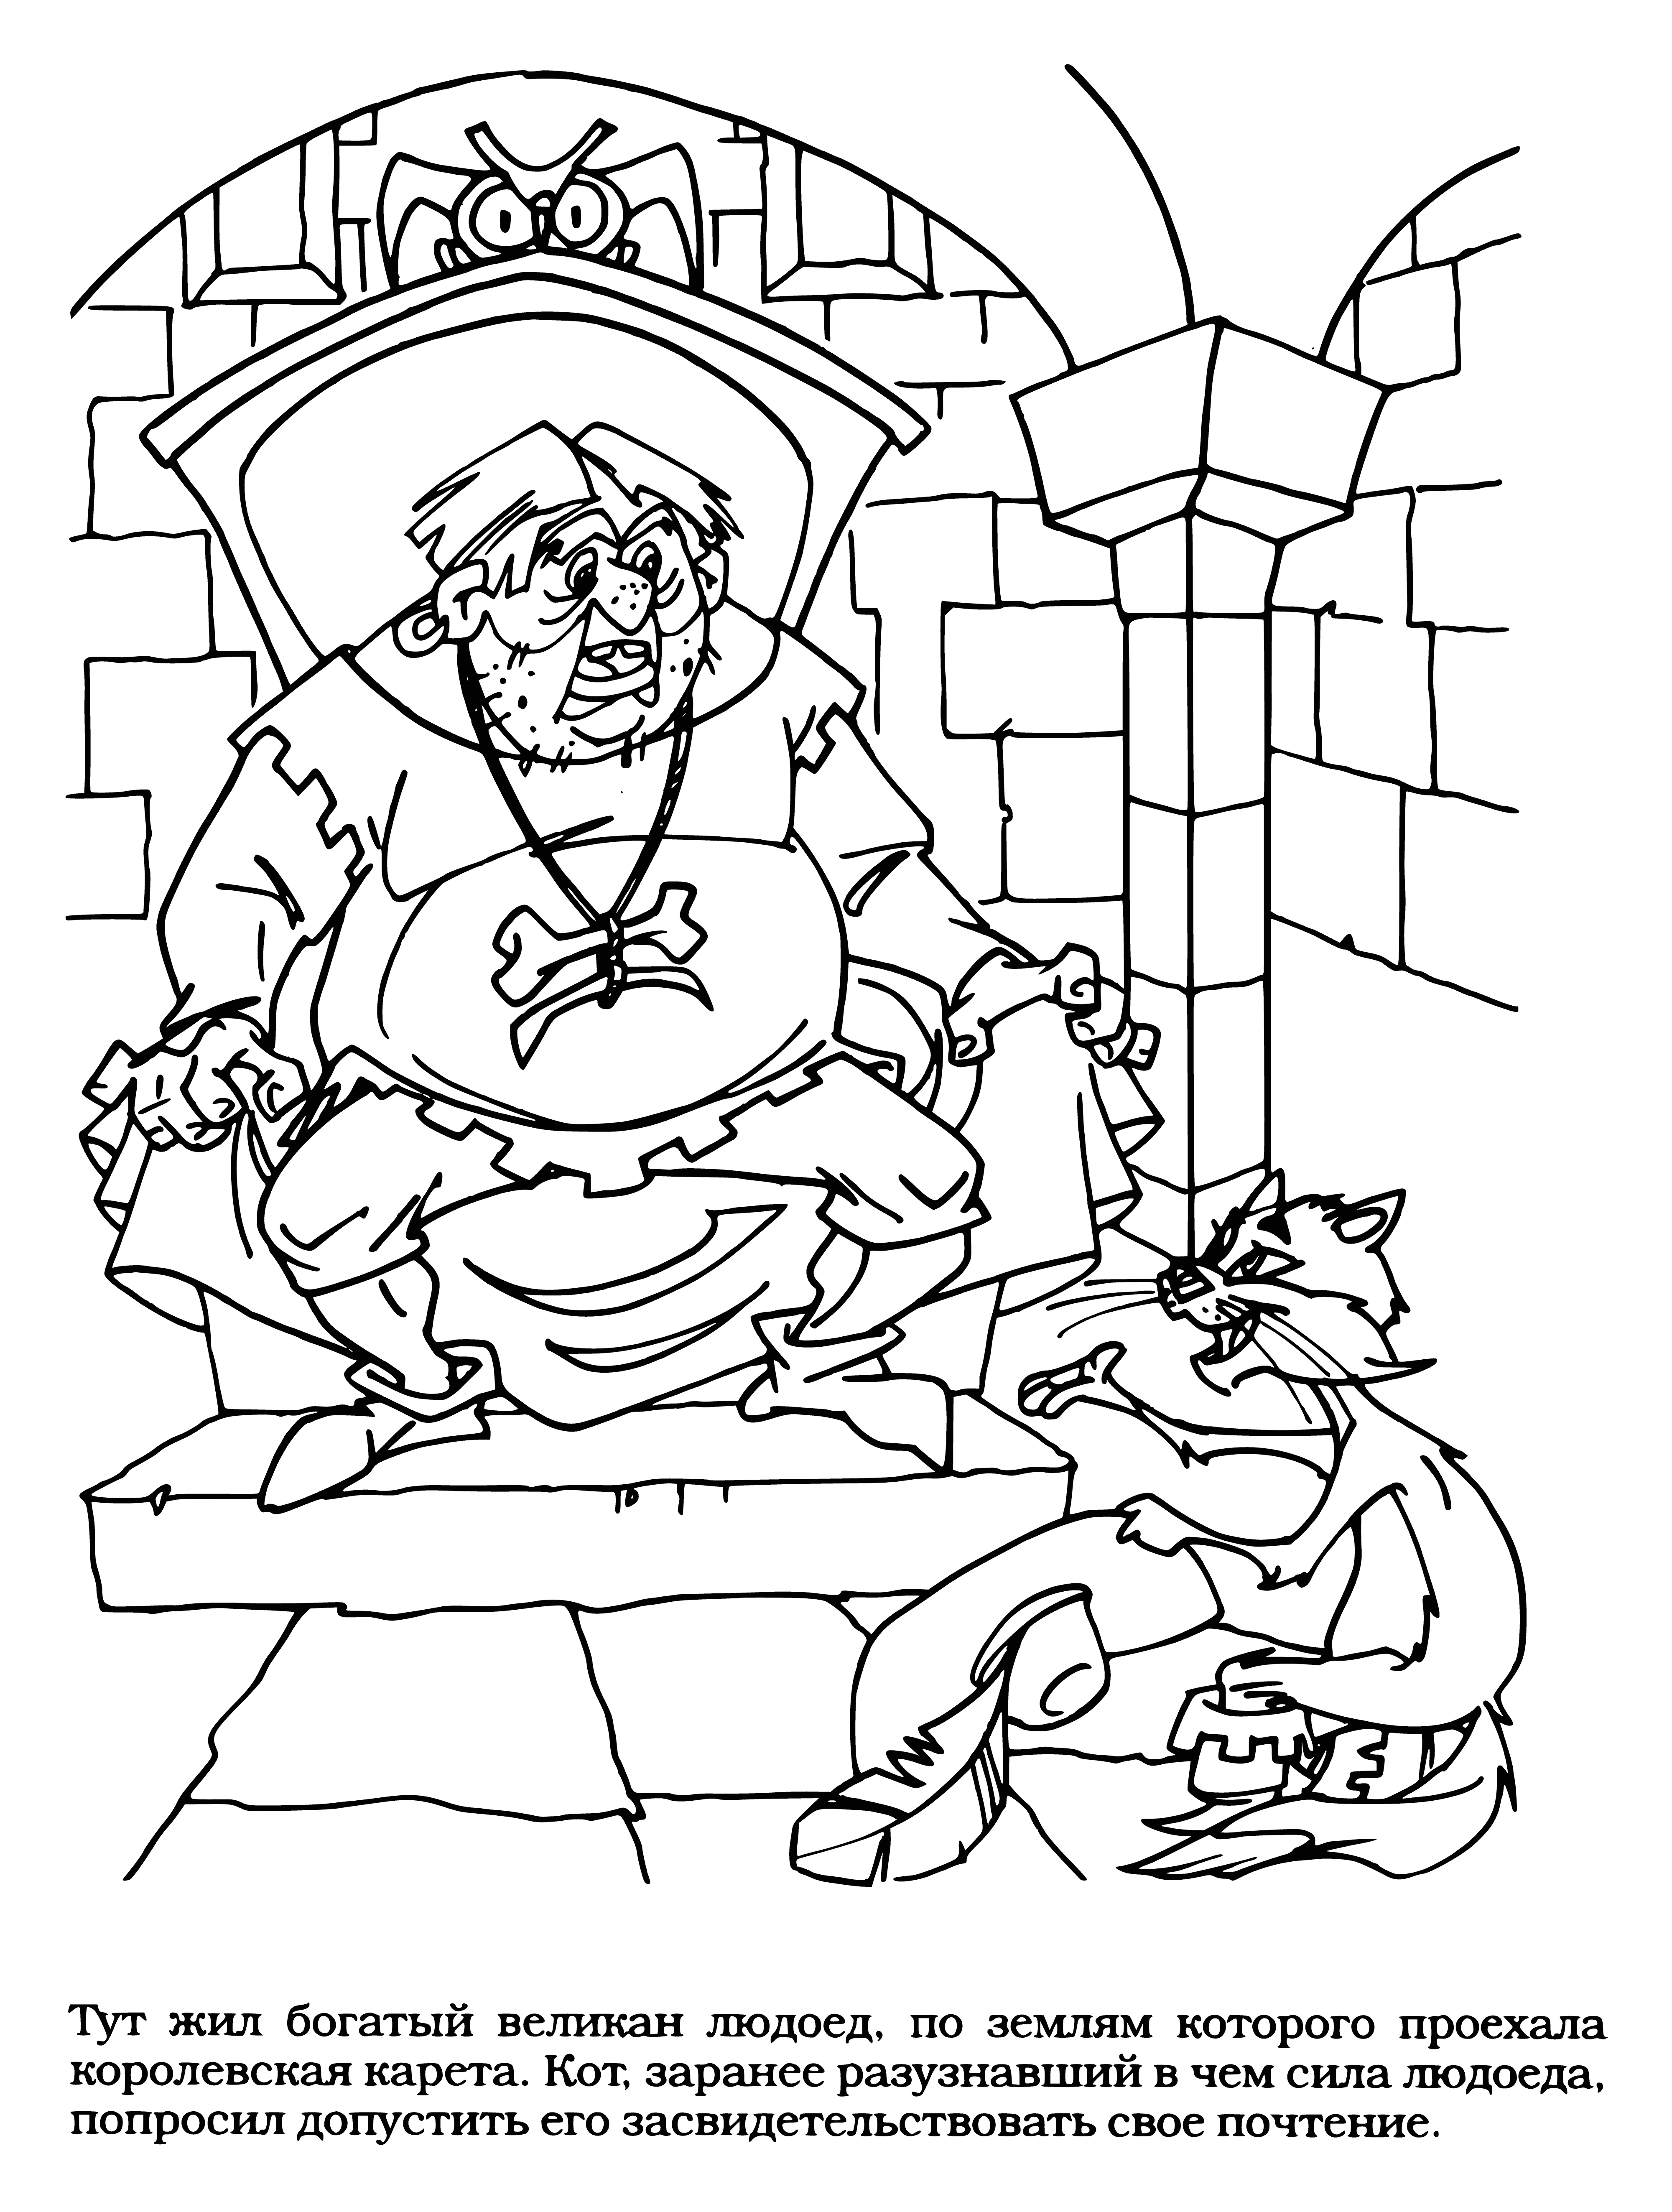 coloring page: Cannibal eats cat: knife & fork on the table, cat on the plate, cutting it up.